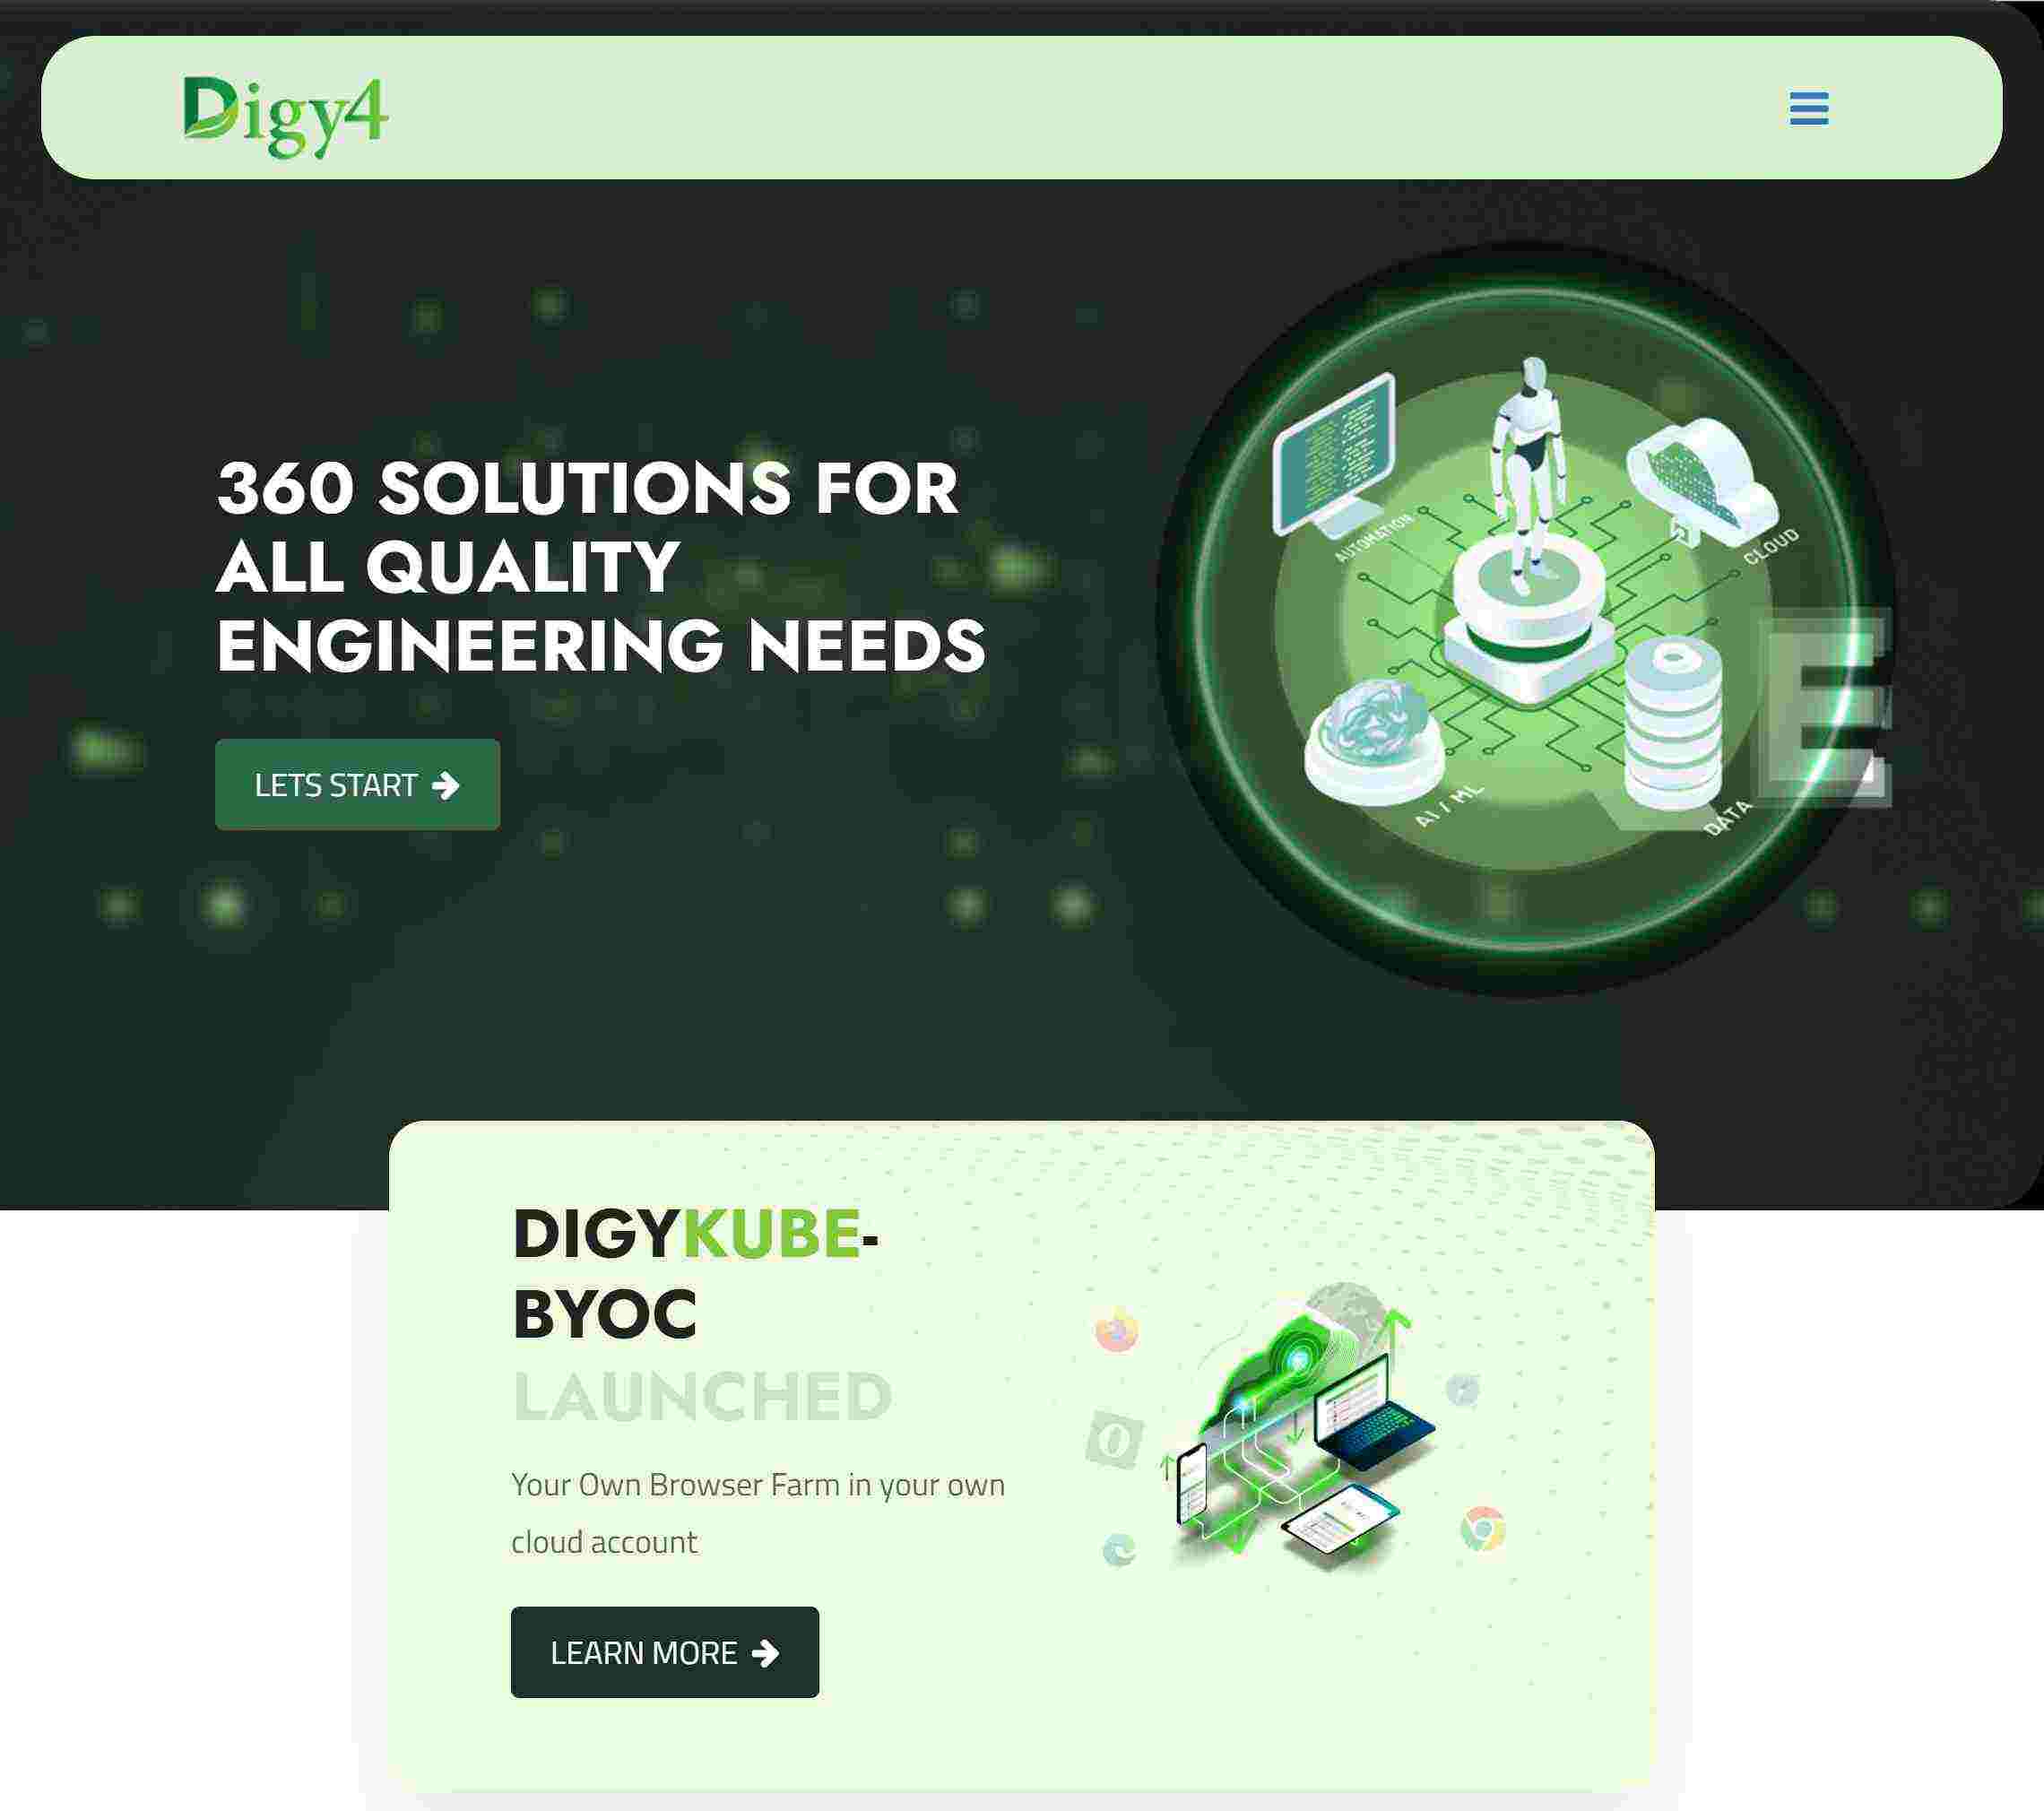 digy4 corporate website